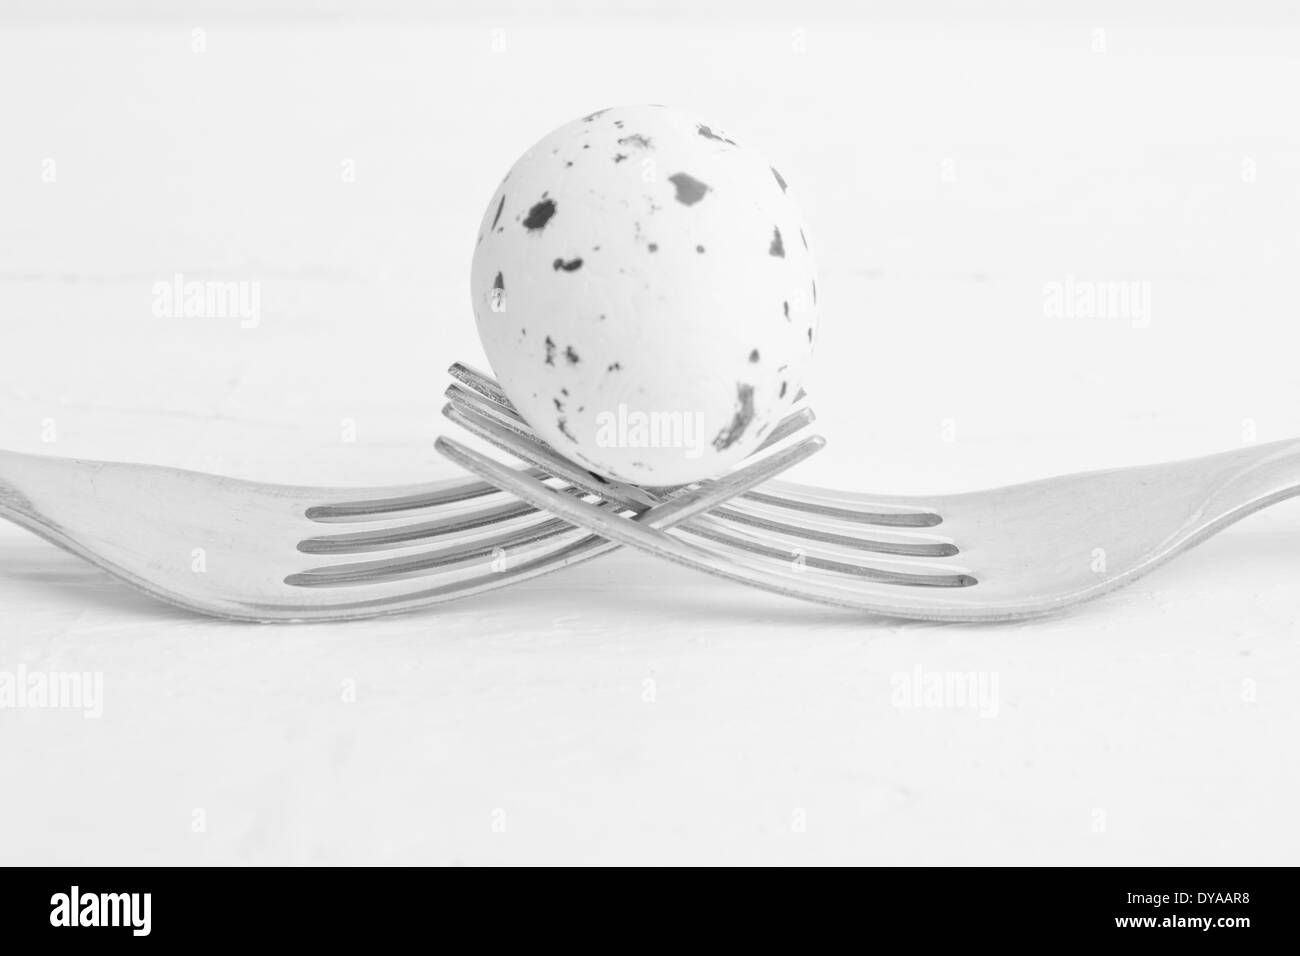 A Quail's egg positioned between two forks. The two forks holding up the Quail's egg. Stock Photo